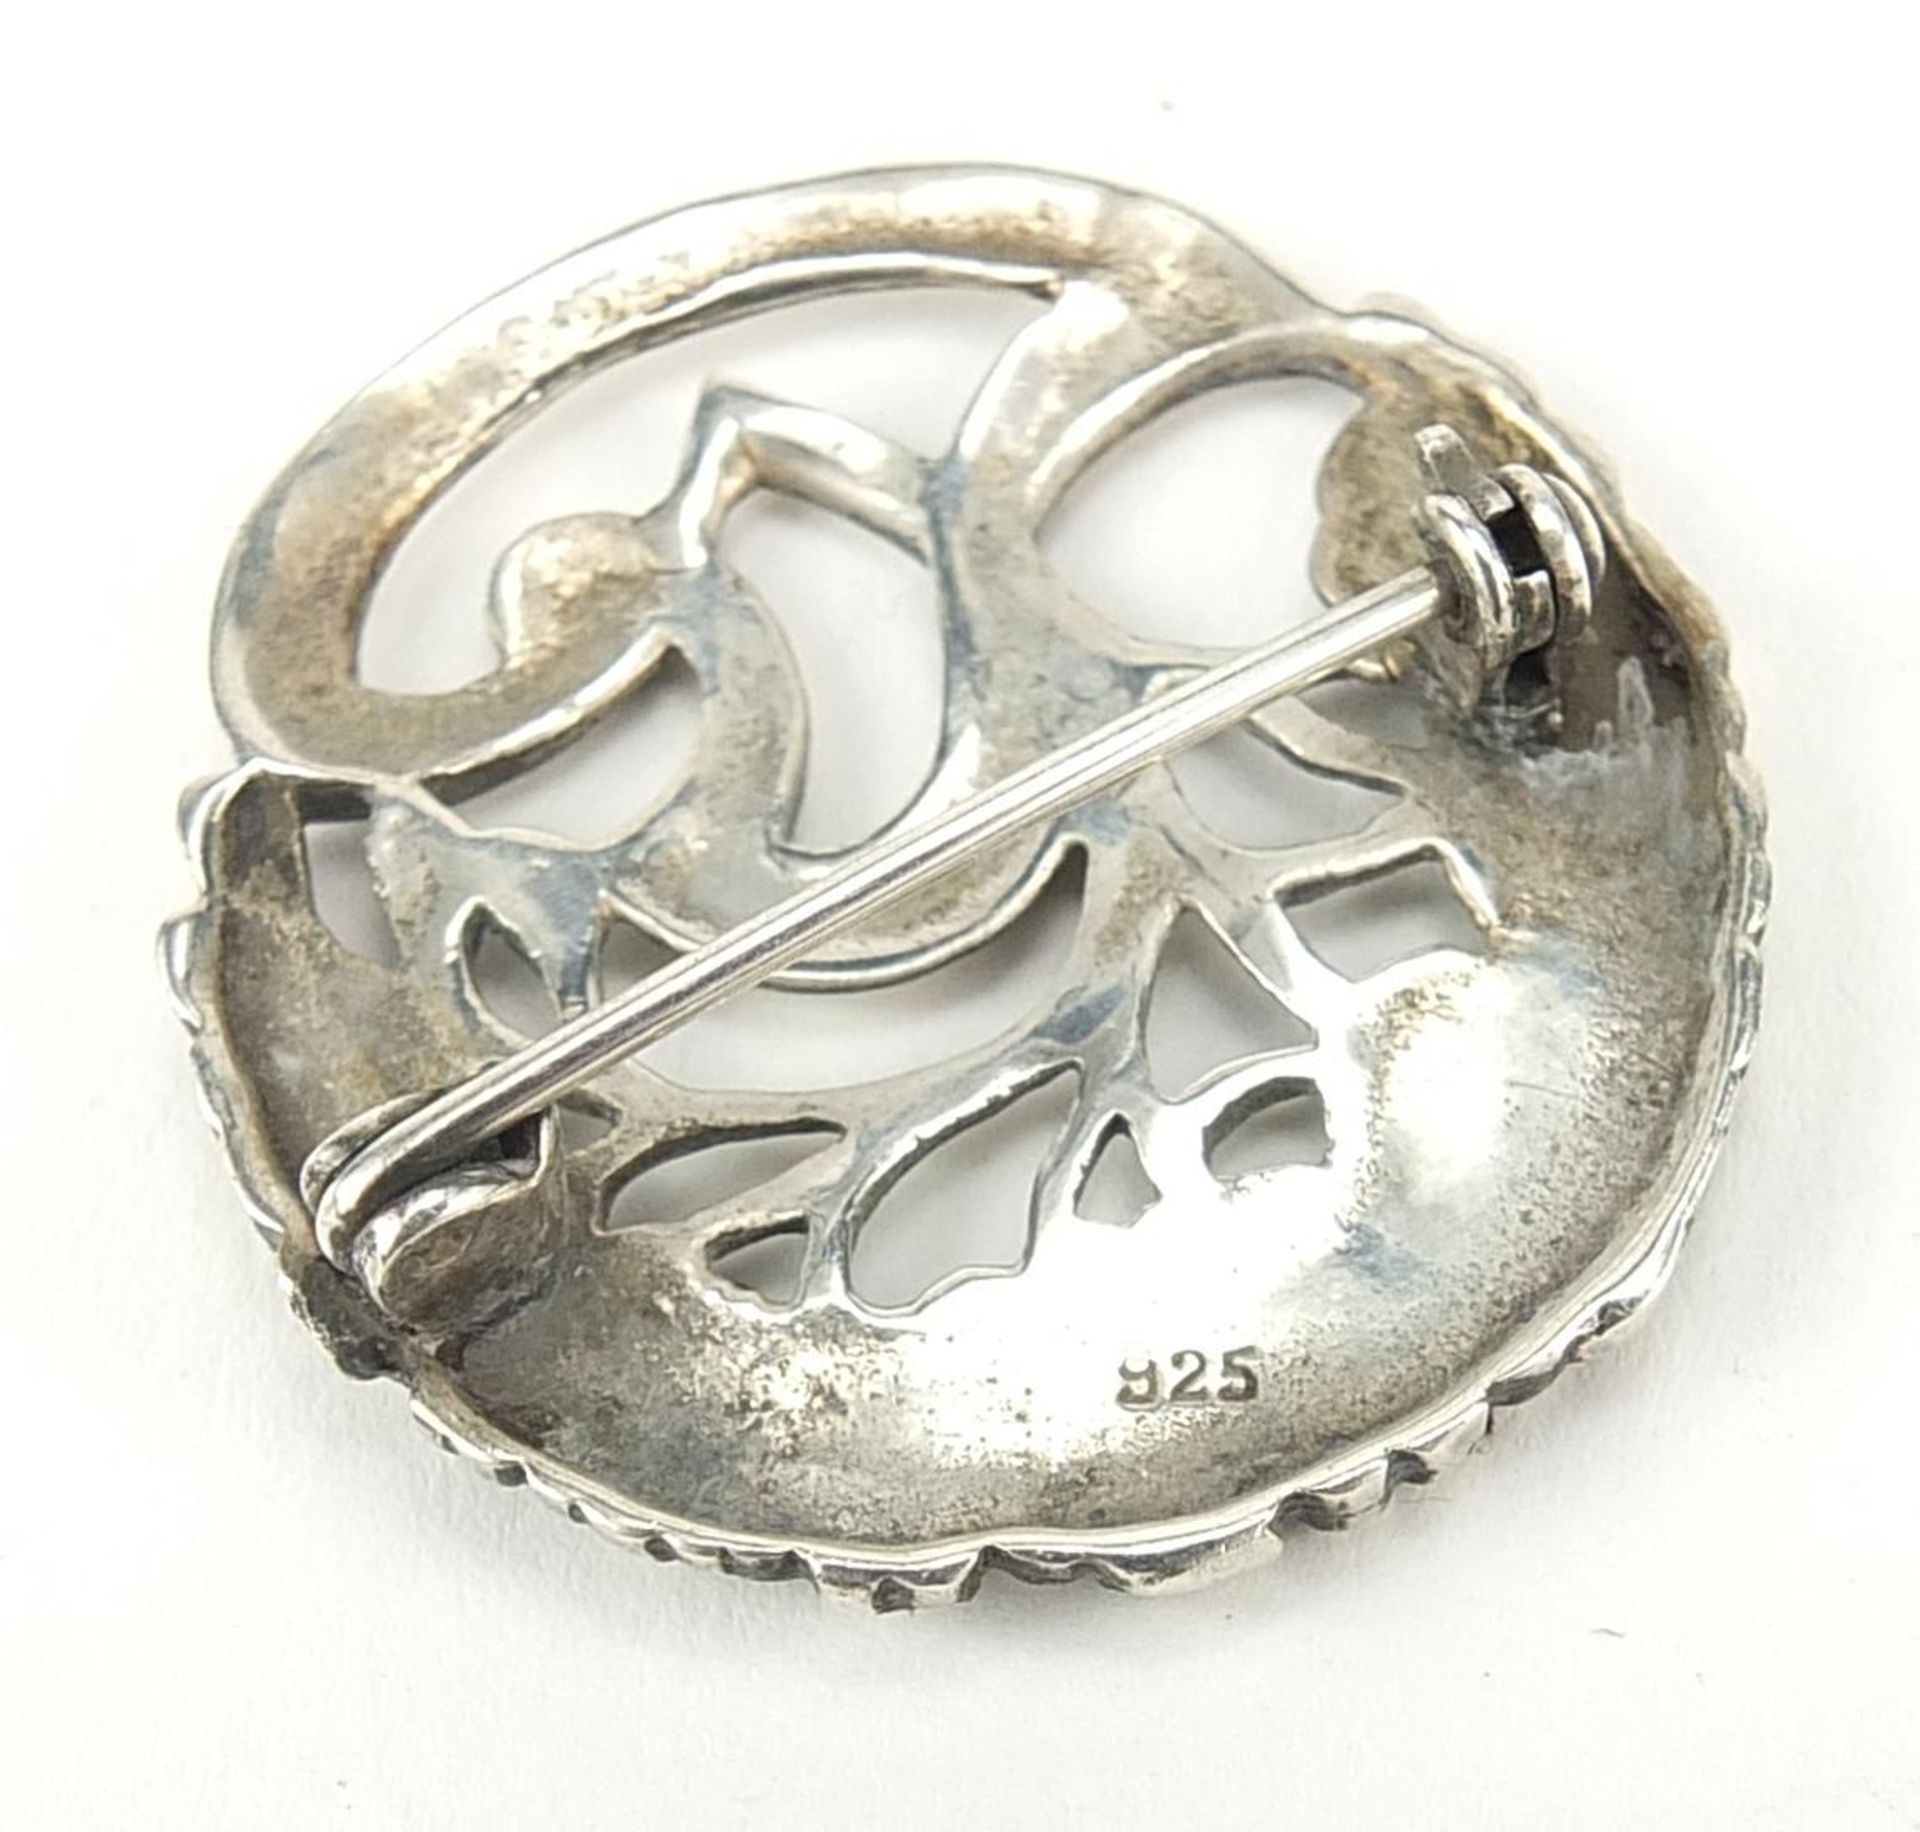 Six Art Nouveau design silver brooches, the largest 5.8cm wide, total 49.8g - Image 5 of 5